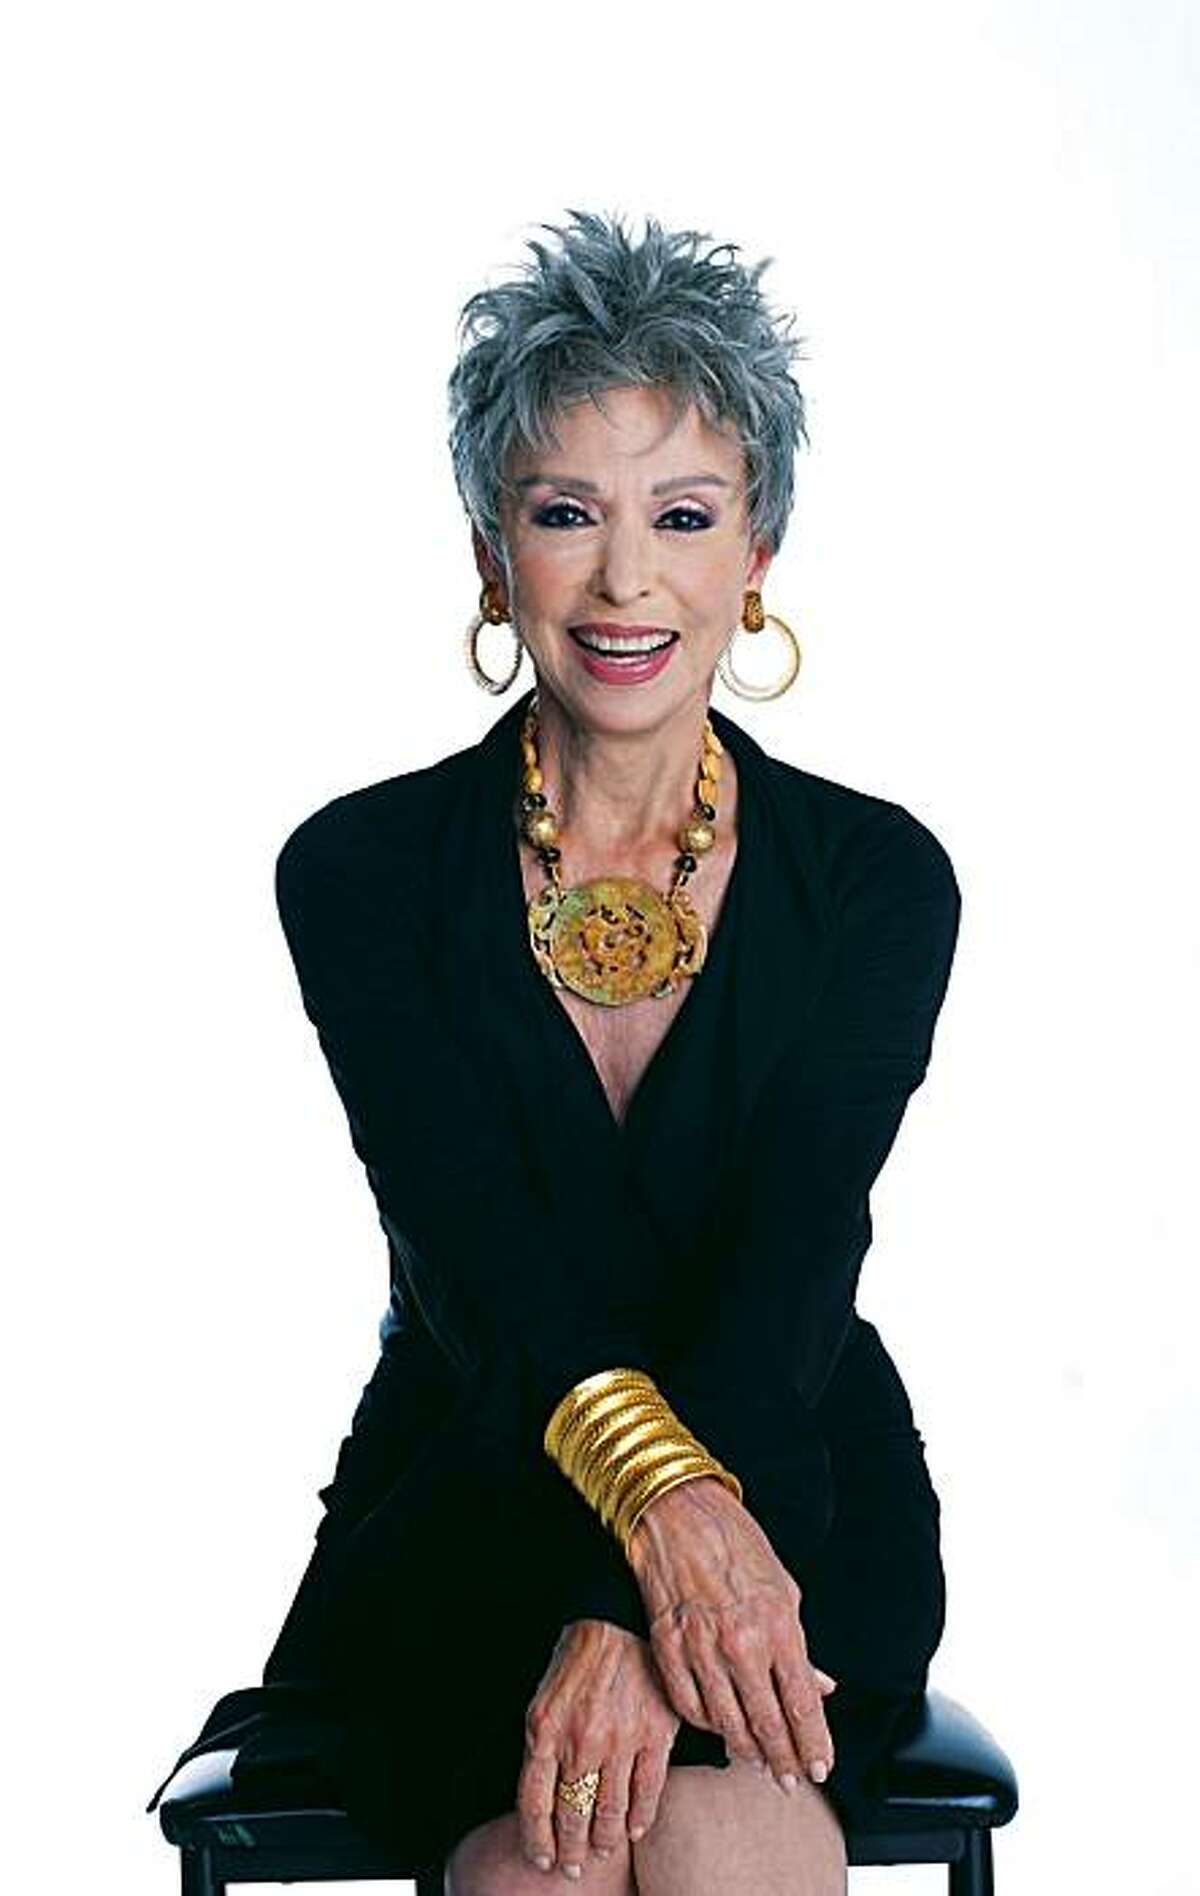 Chronicle columnist Jon Carroll will host an evening in conversation with Tony and Academy Award winning actress Rita Moreno at 7 p.m. April 20 at Berkeley Repertory Theatre.